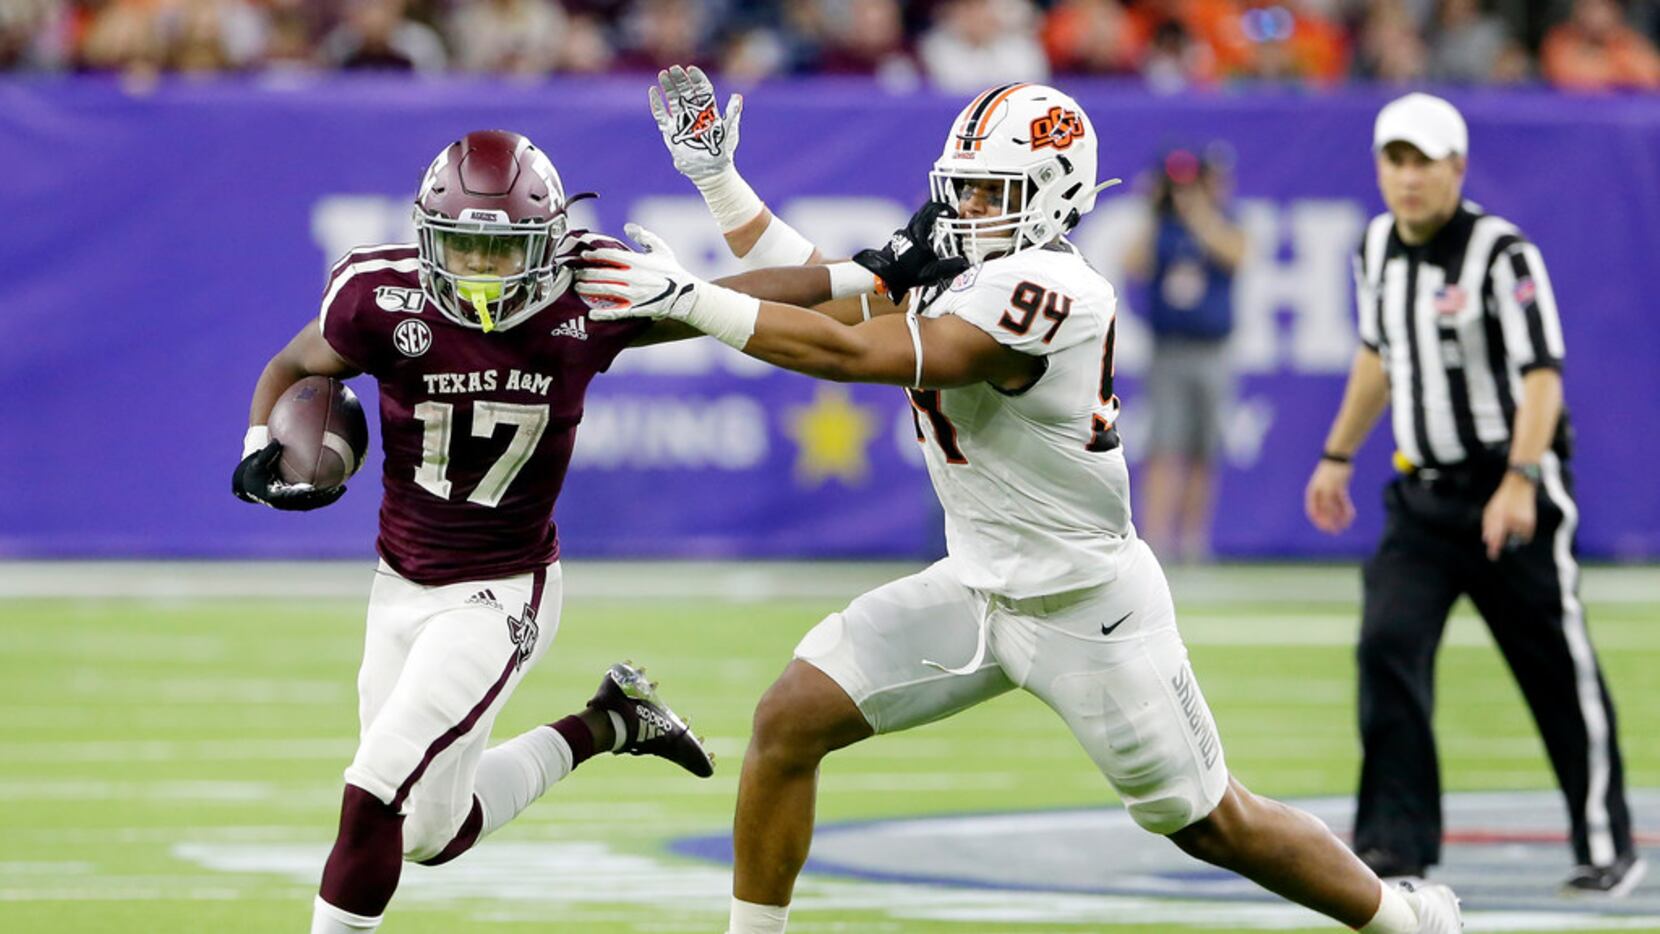 Texas A&M wide receiver Ainias Smith (17) fends off Oklahoma State defensive end Trace Ford...